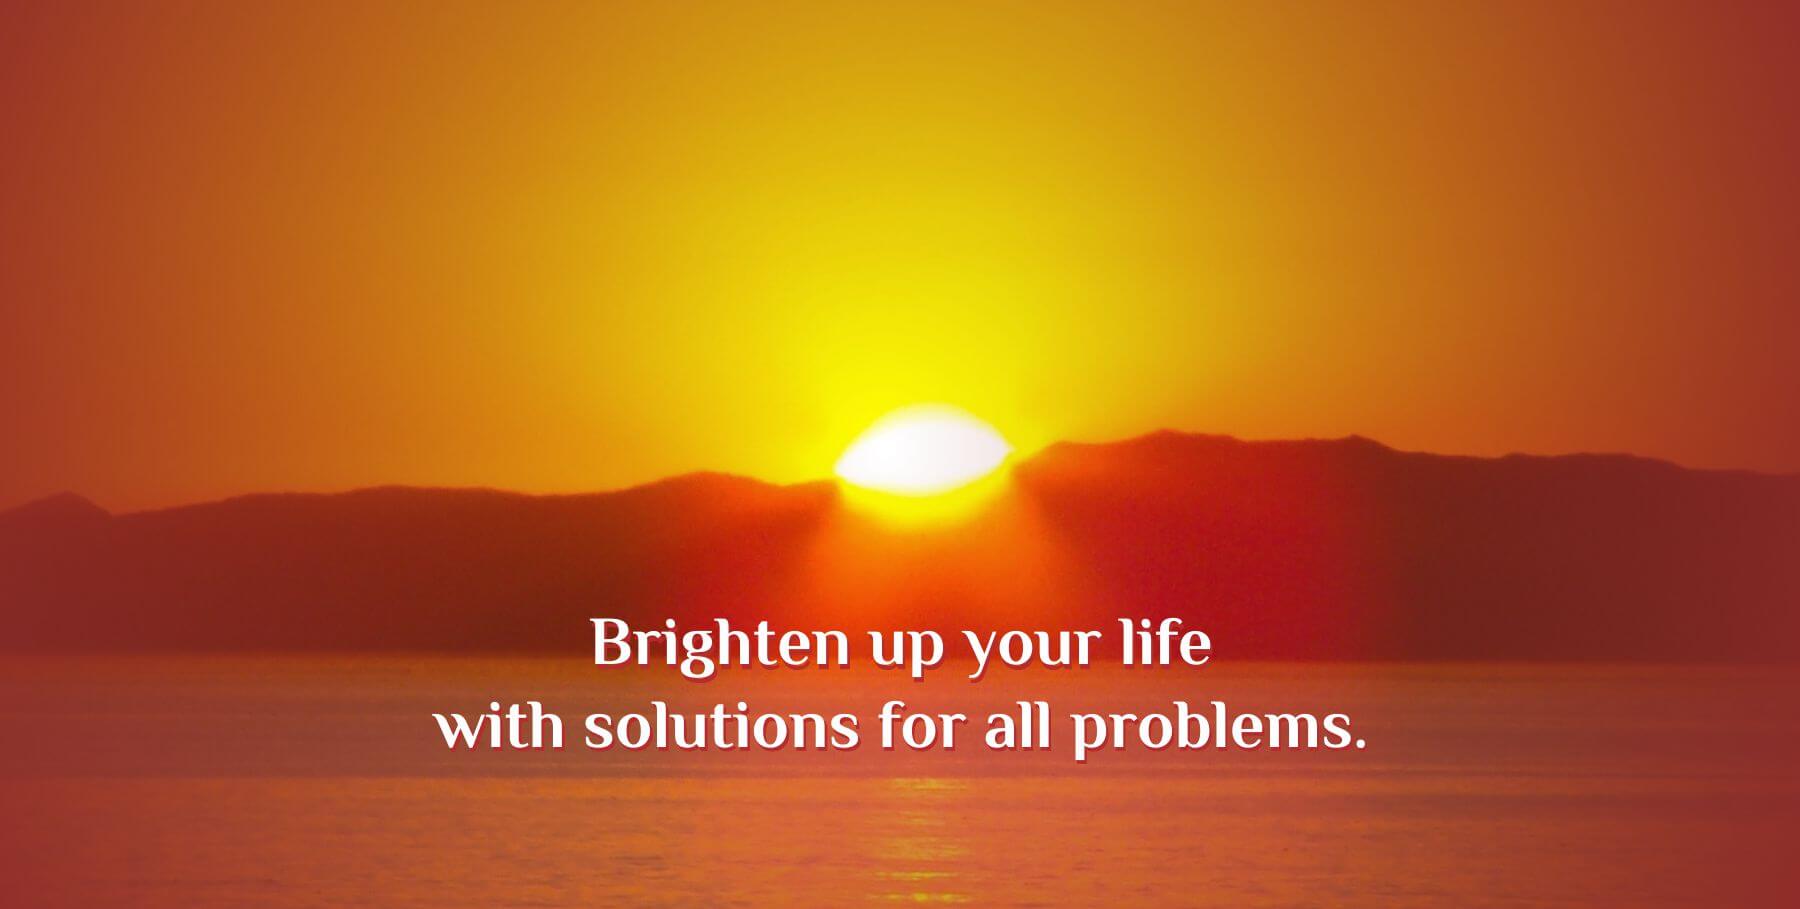 Brighten up your life with solutions for all problems.